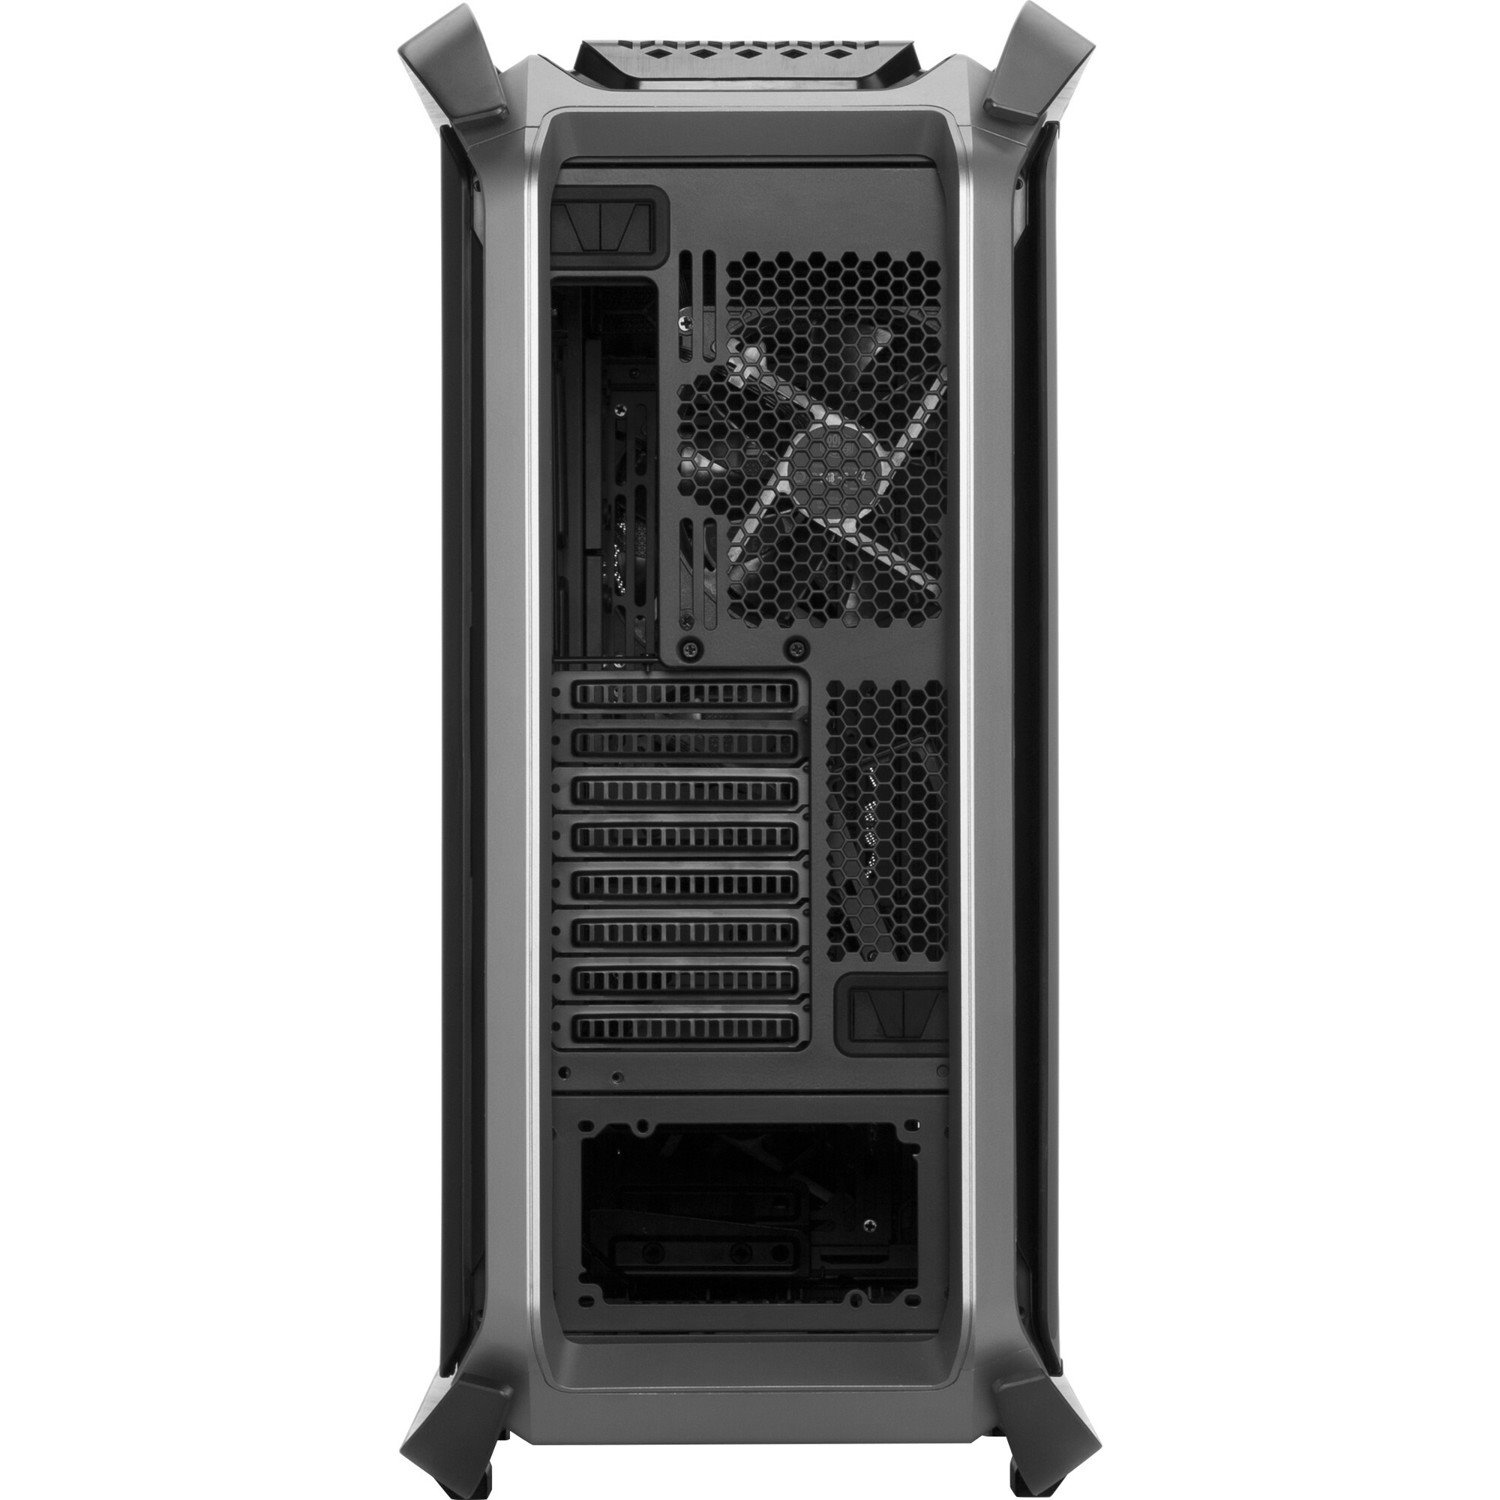 Cooler Master Cosmos C700M Computer Case - Mini ITX, Micro ATX, ATX Motherboard Supported - Full-tower - Steel, Tempered Glass - Silver, Black